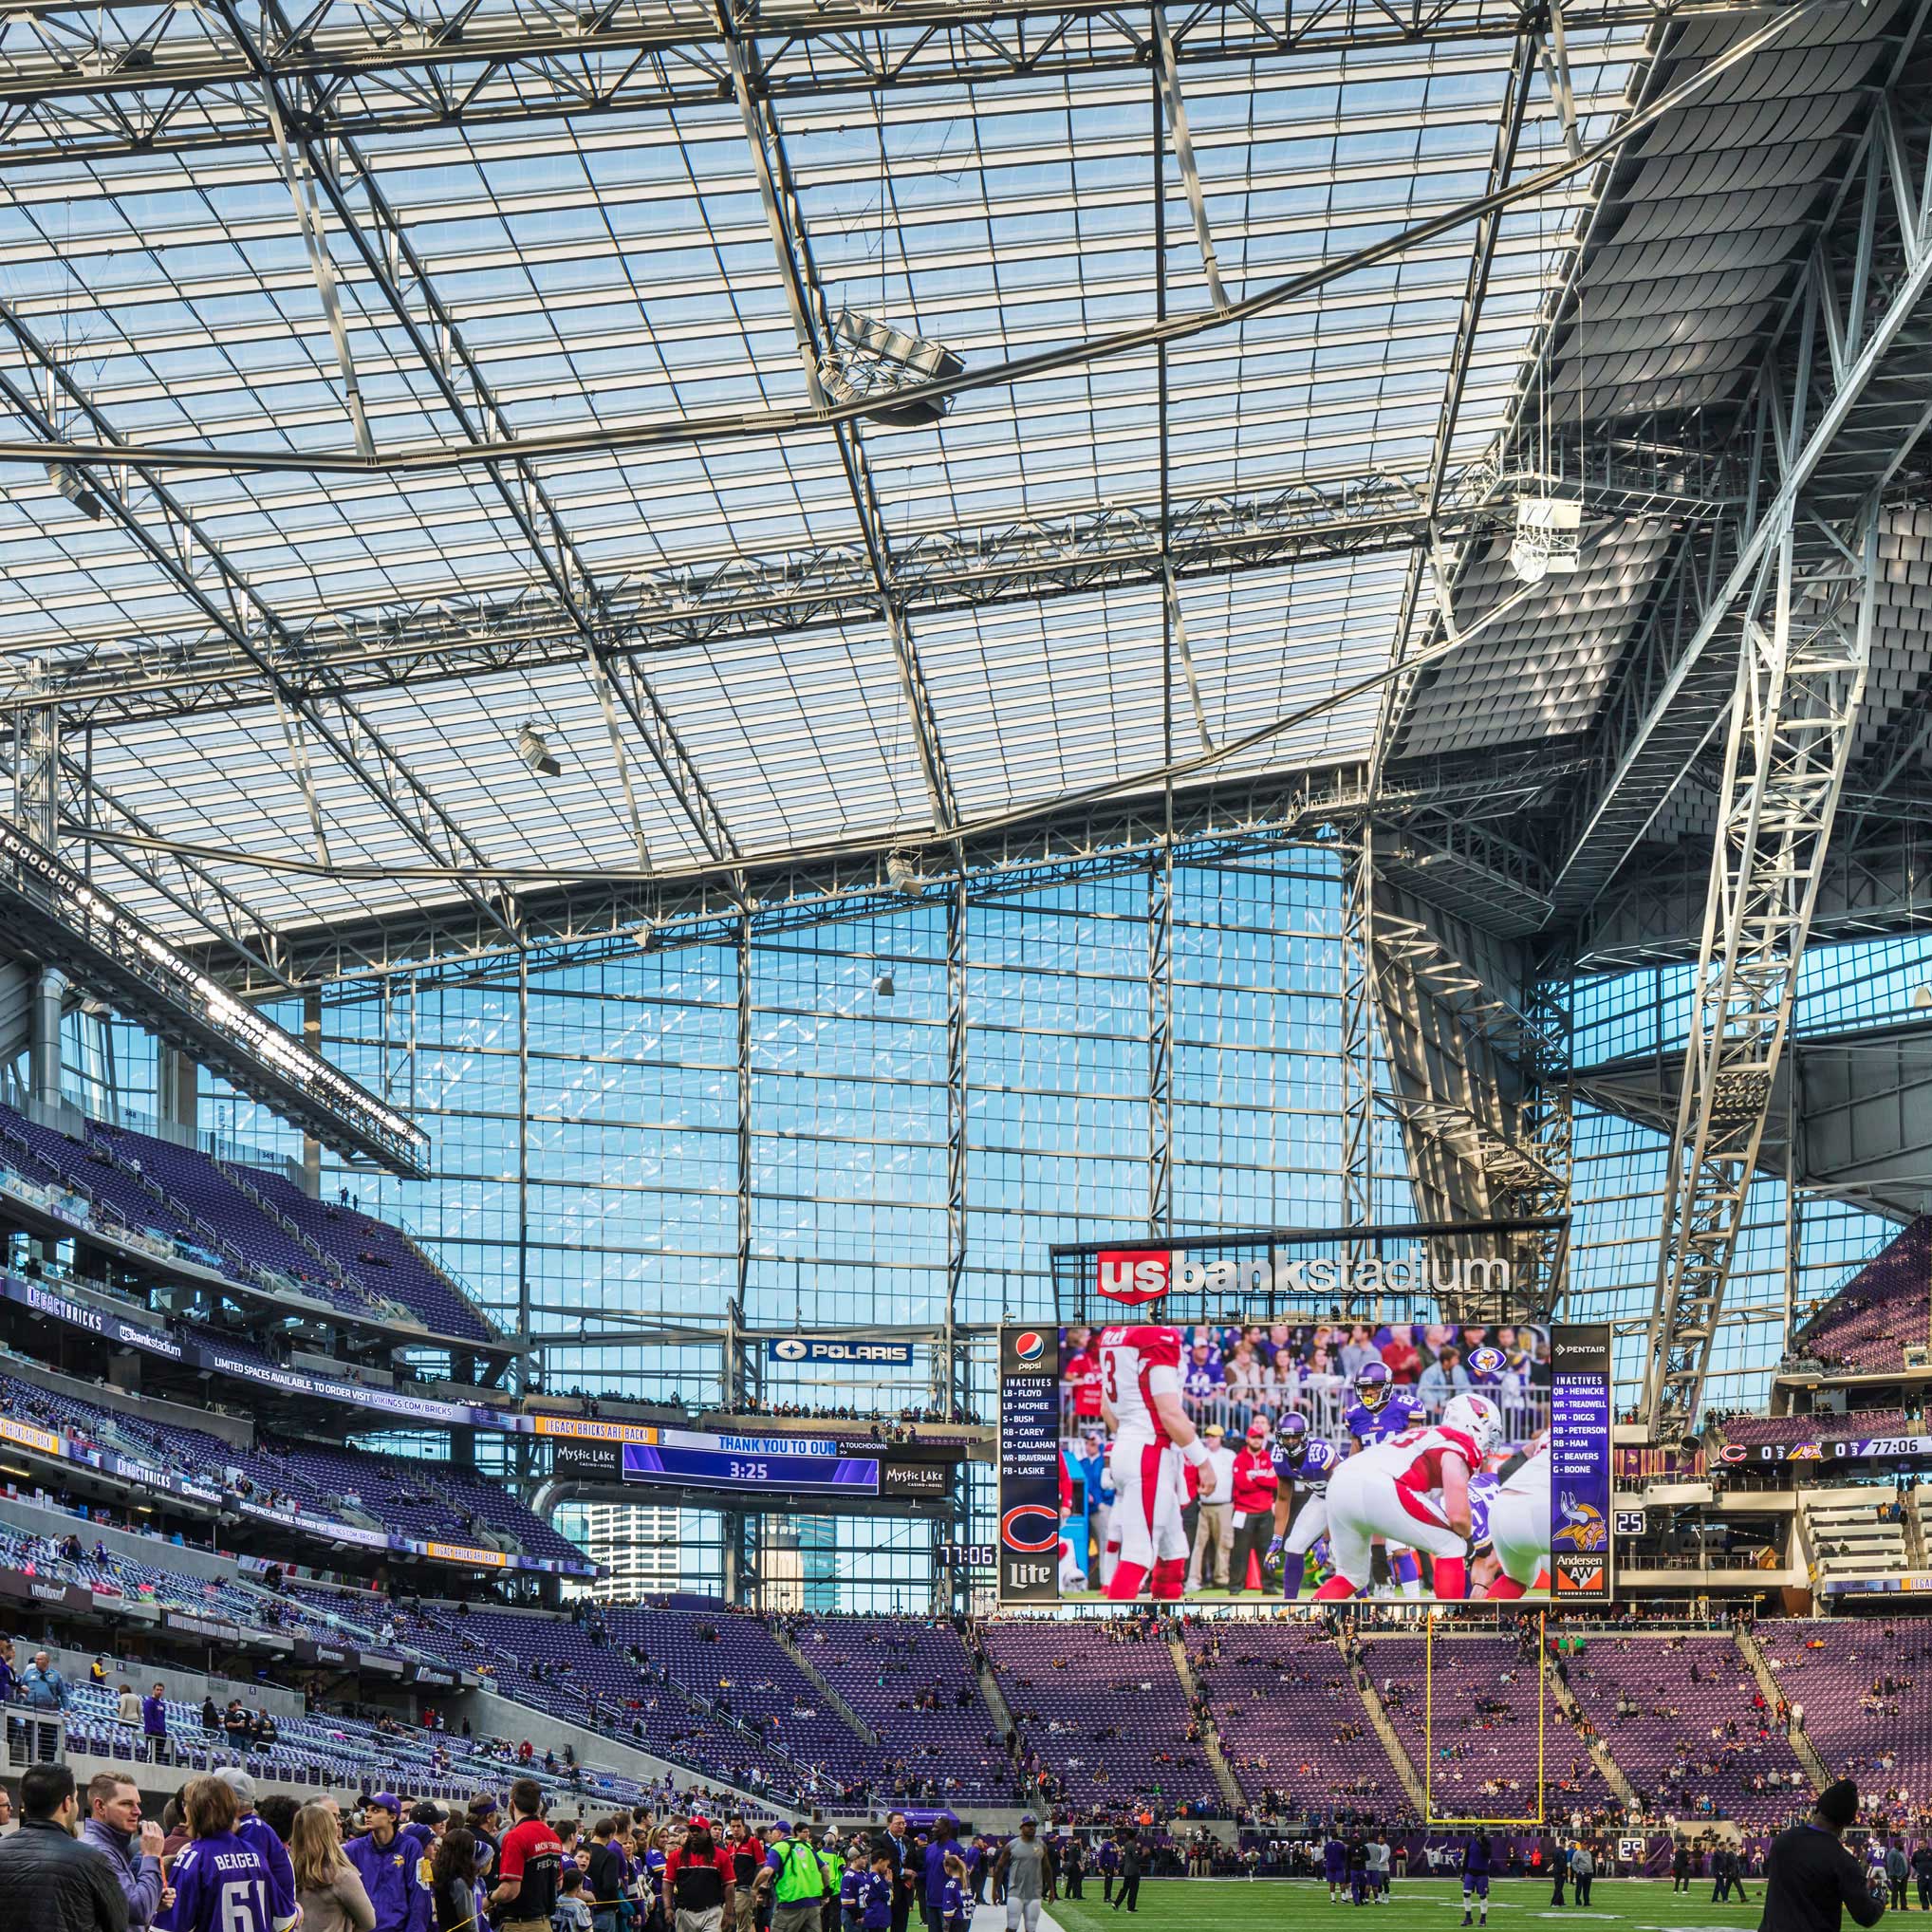 ETFE Creates Visual Transparency and Sustainability for U.S. Bank Stadium in Minneapolis